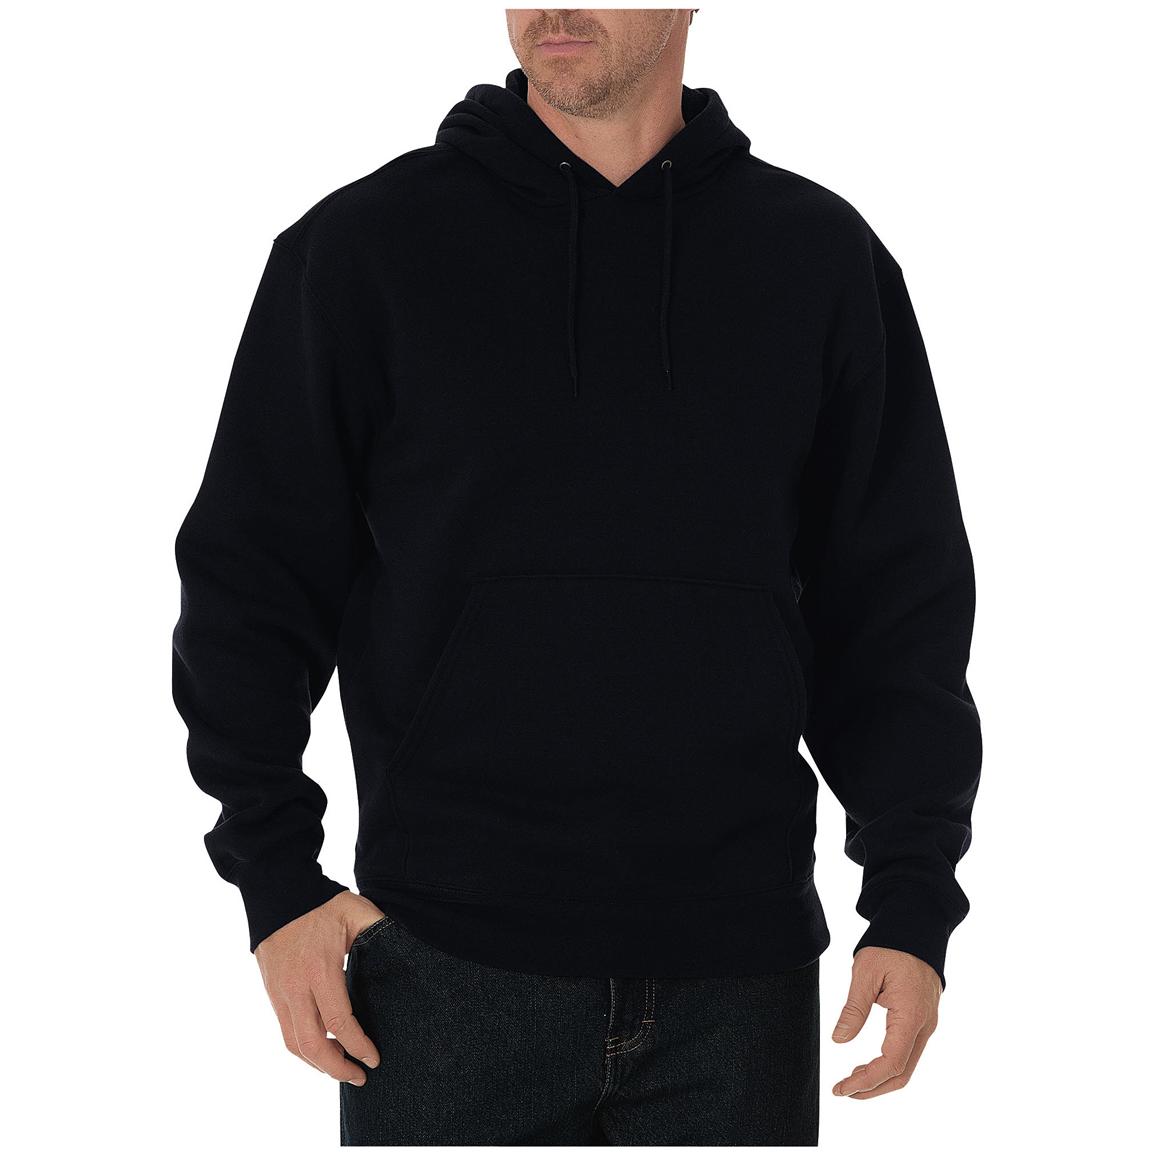 Collection Black Pullover Hoodie Pictures - Reikian